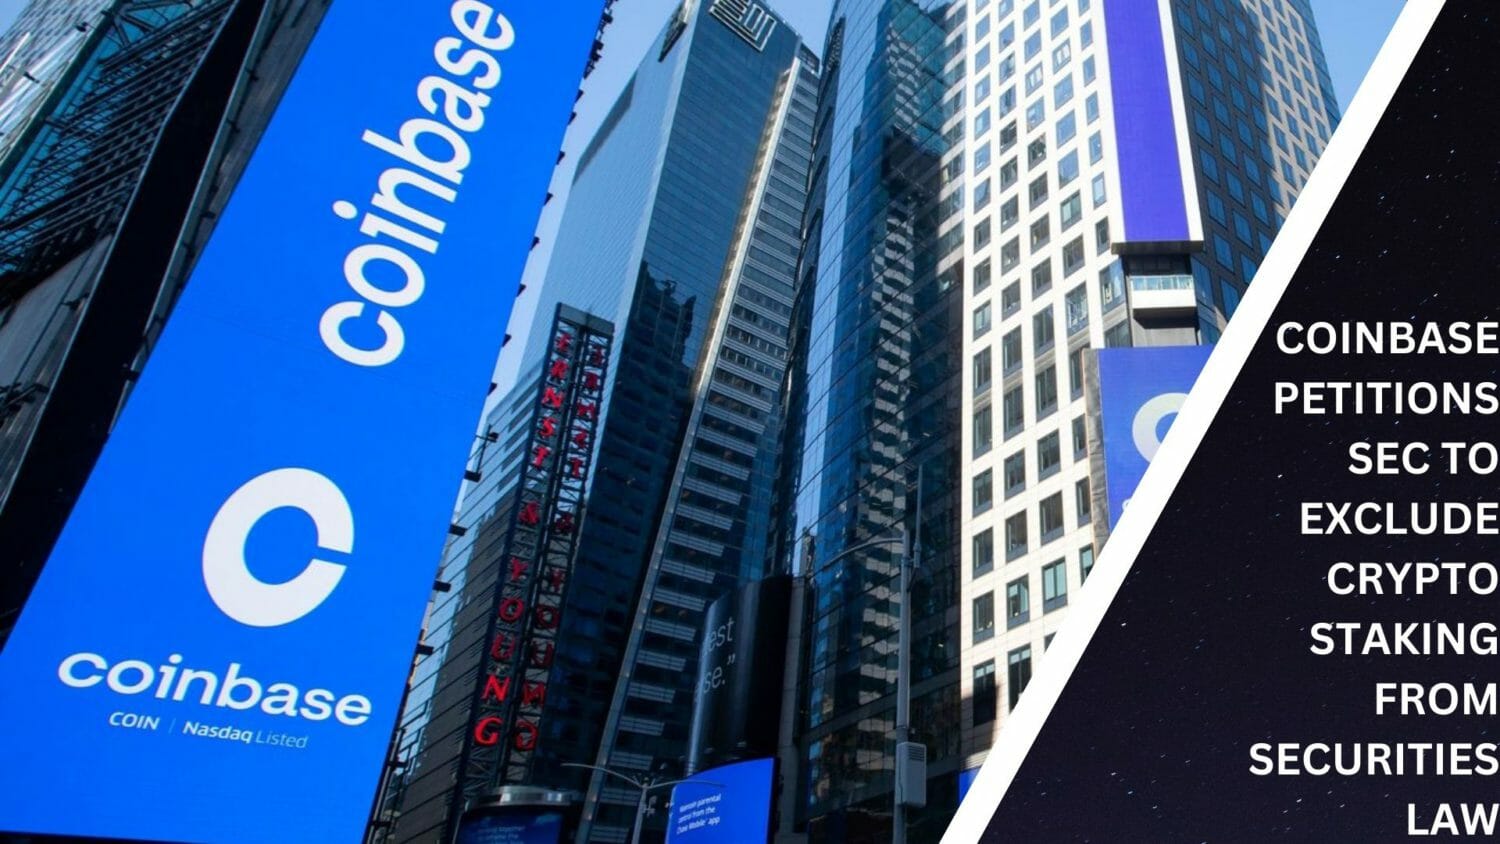 Coinbase Petitions Sec To Exclude Crypto Staking From Securities Law